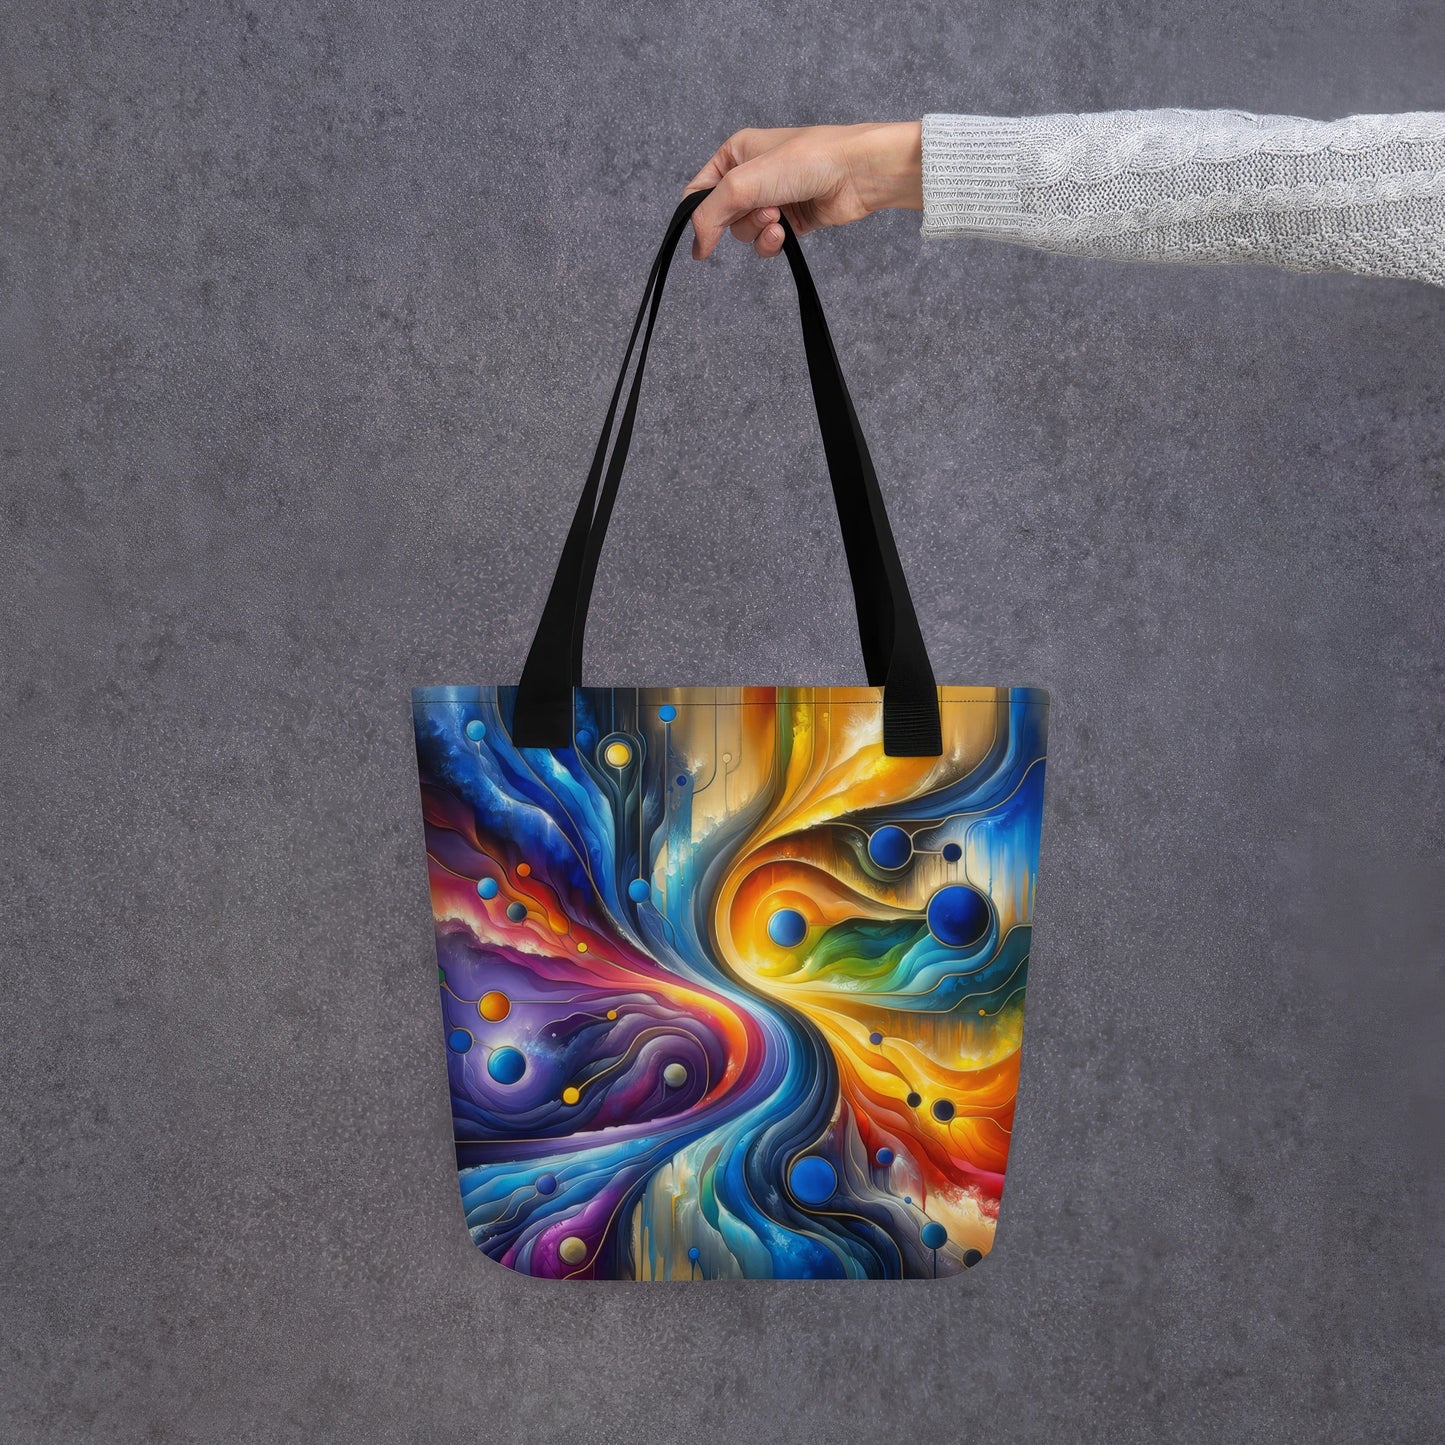 Abstract Art Tote Bag: Continuum of Connection